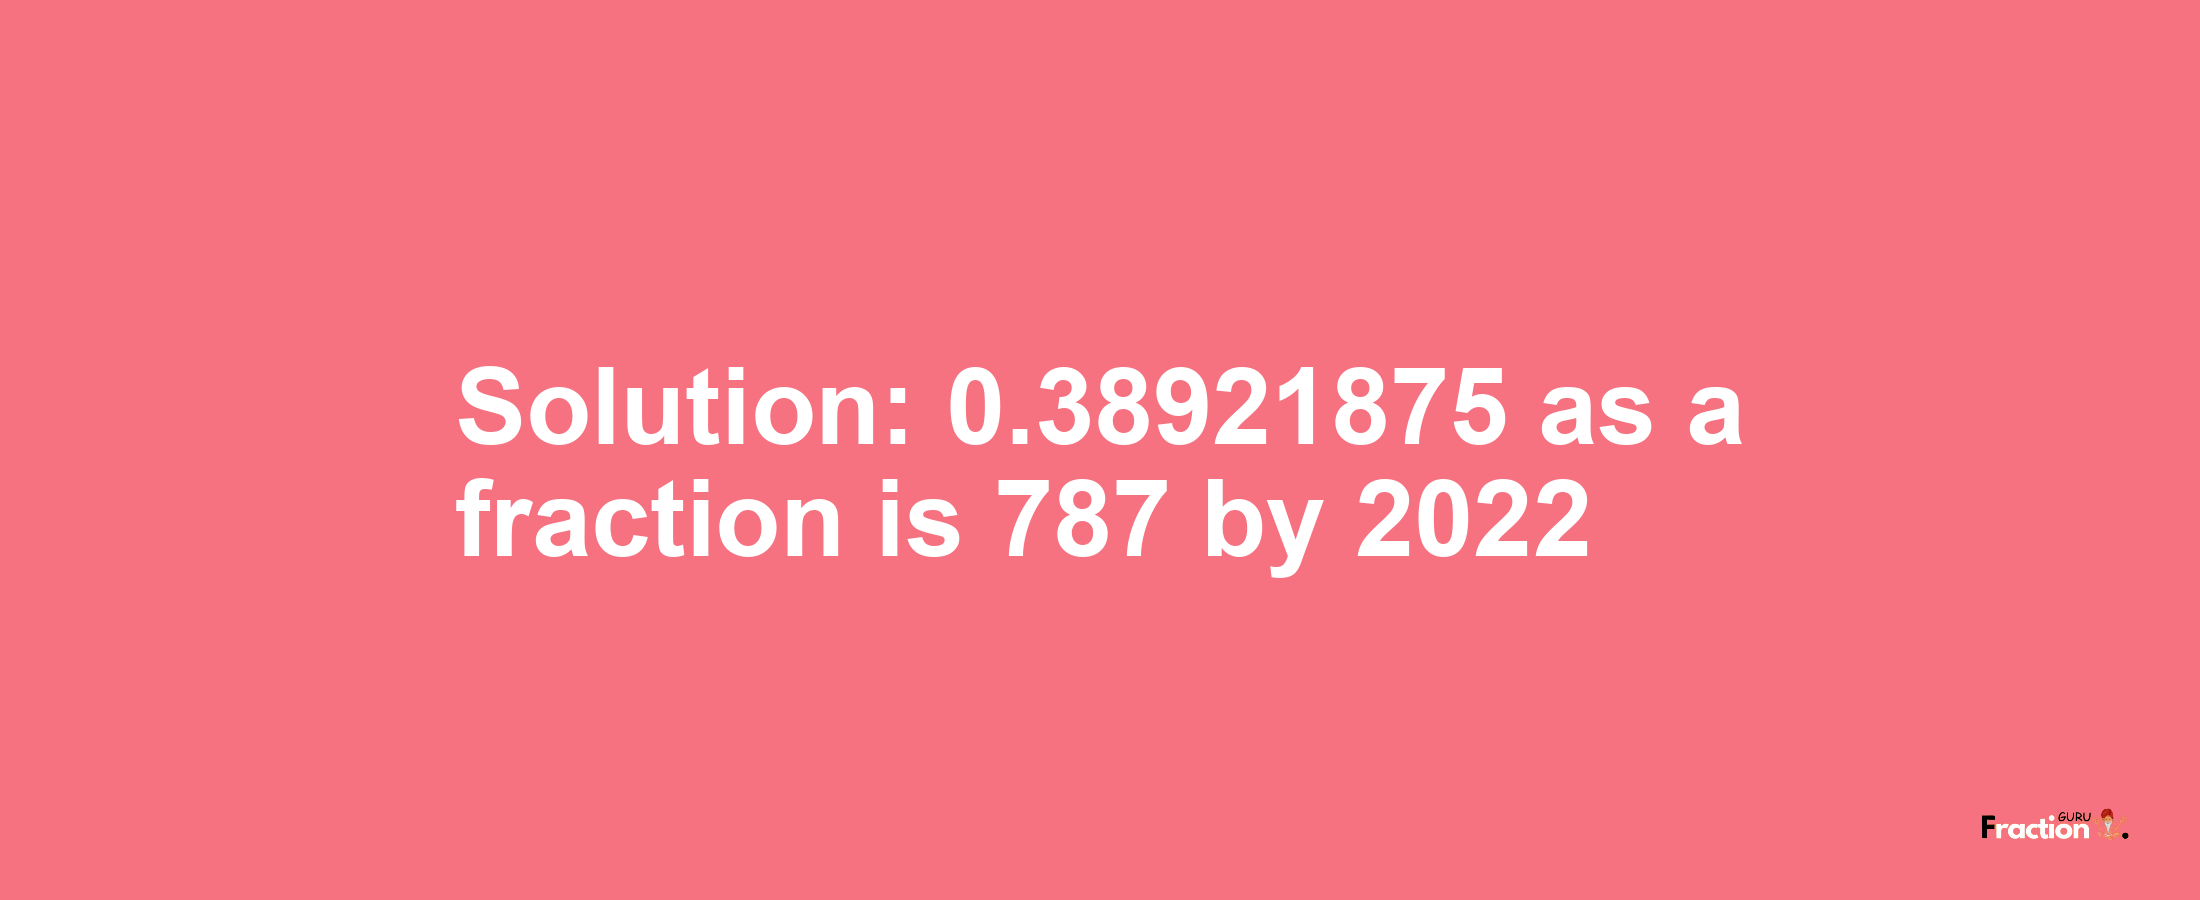 Solution:0.38921875 as a fraction is 787/2022